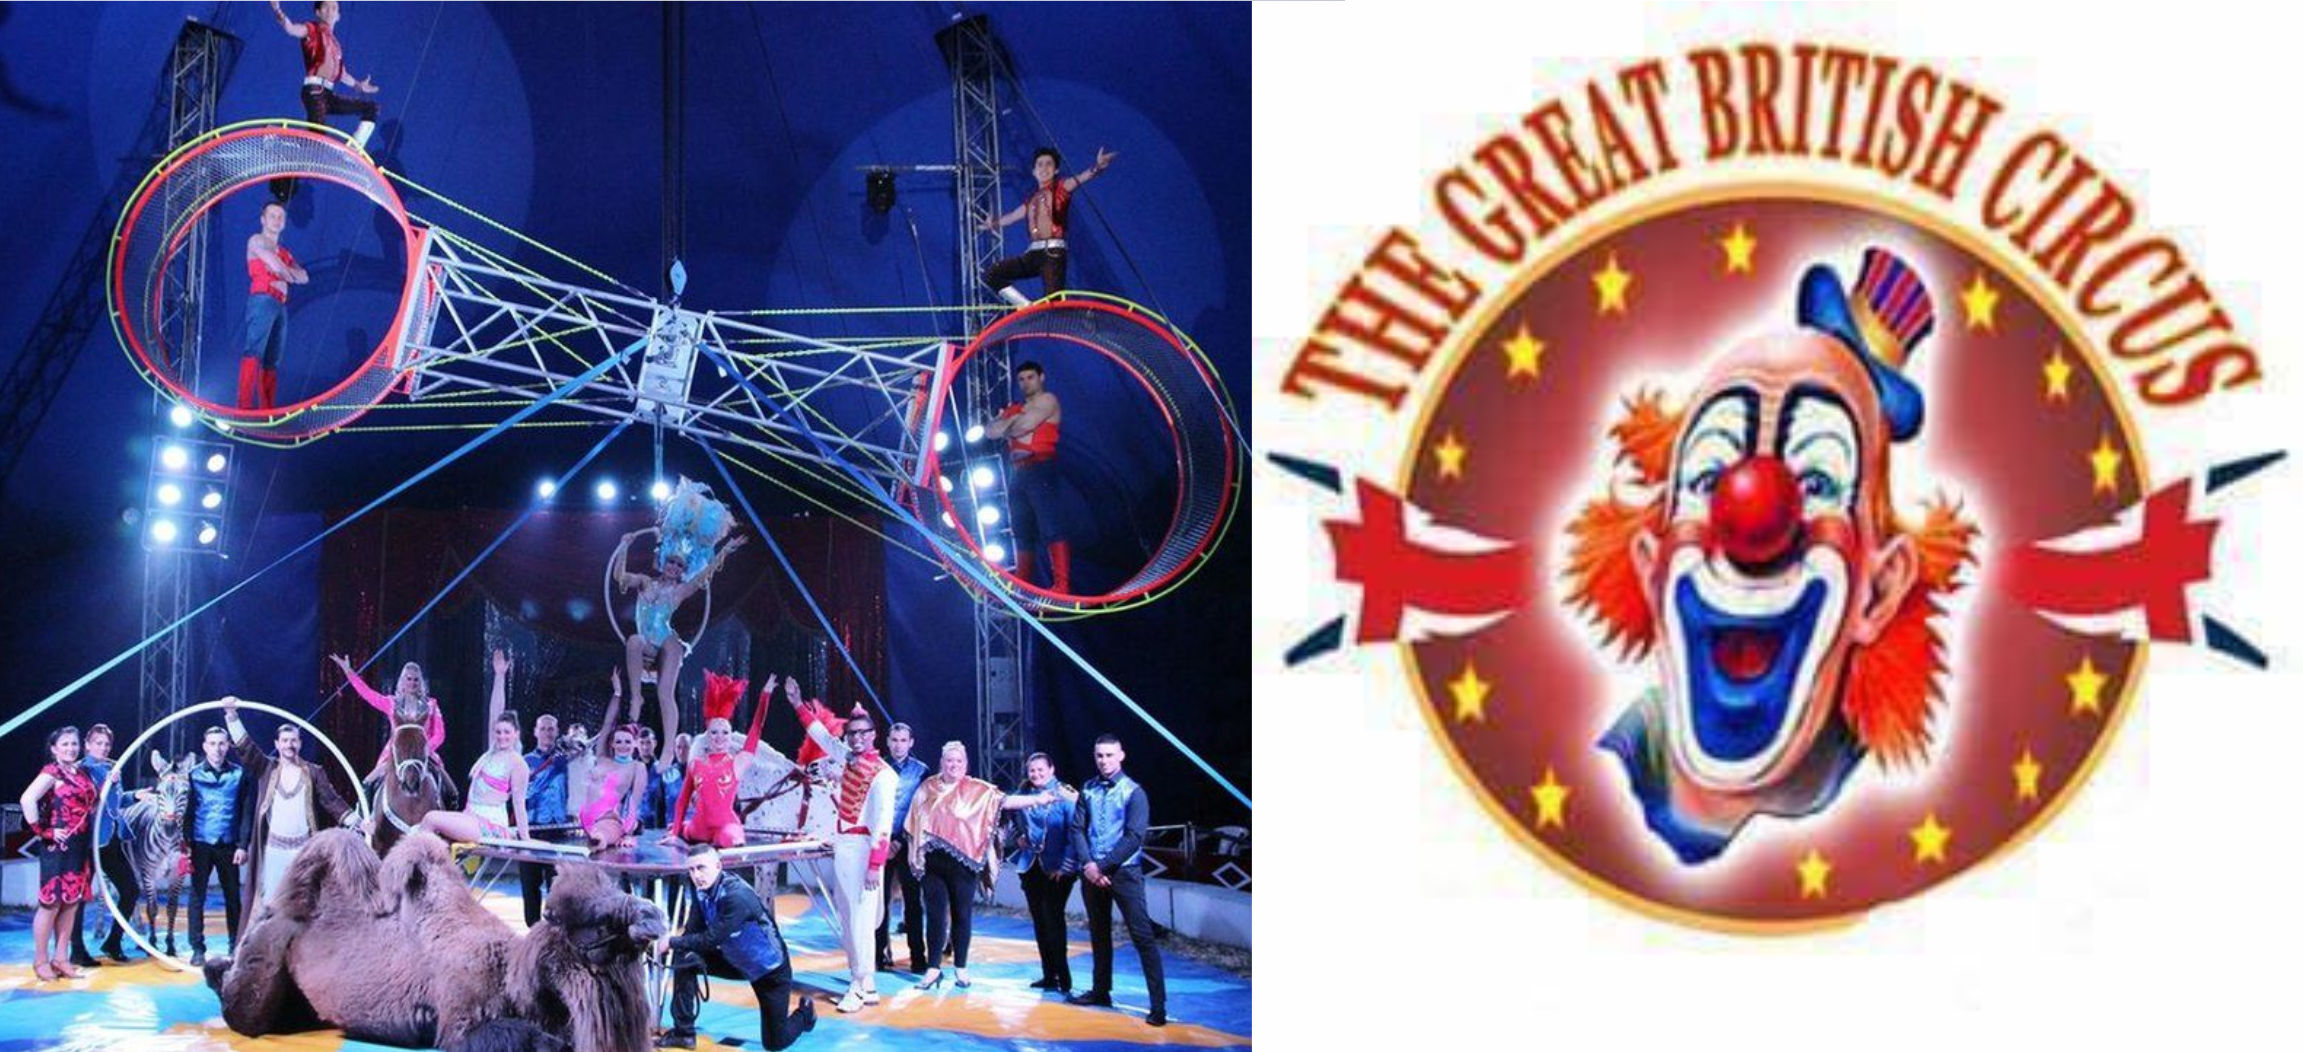 Apparently circuses are still a thing and The Great British Circus is coming to Malaysia for some fun filled wonderful entertainment!